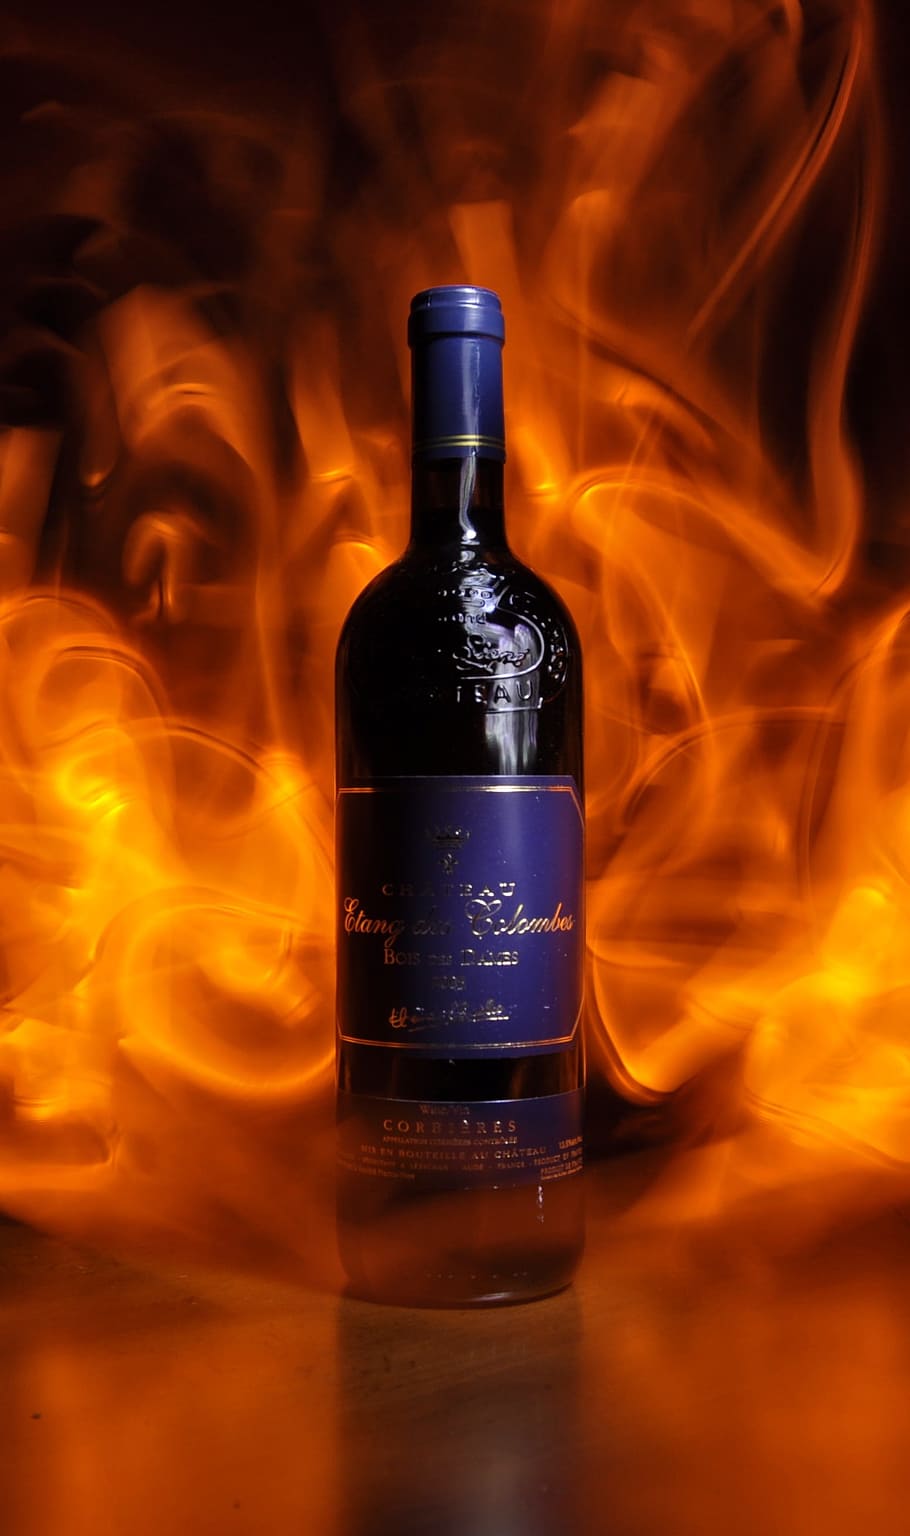 wine, bottle, flames, fire, light painting, burning, fire - natural phenomenon, container, alcohol, heat - temperature